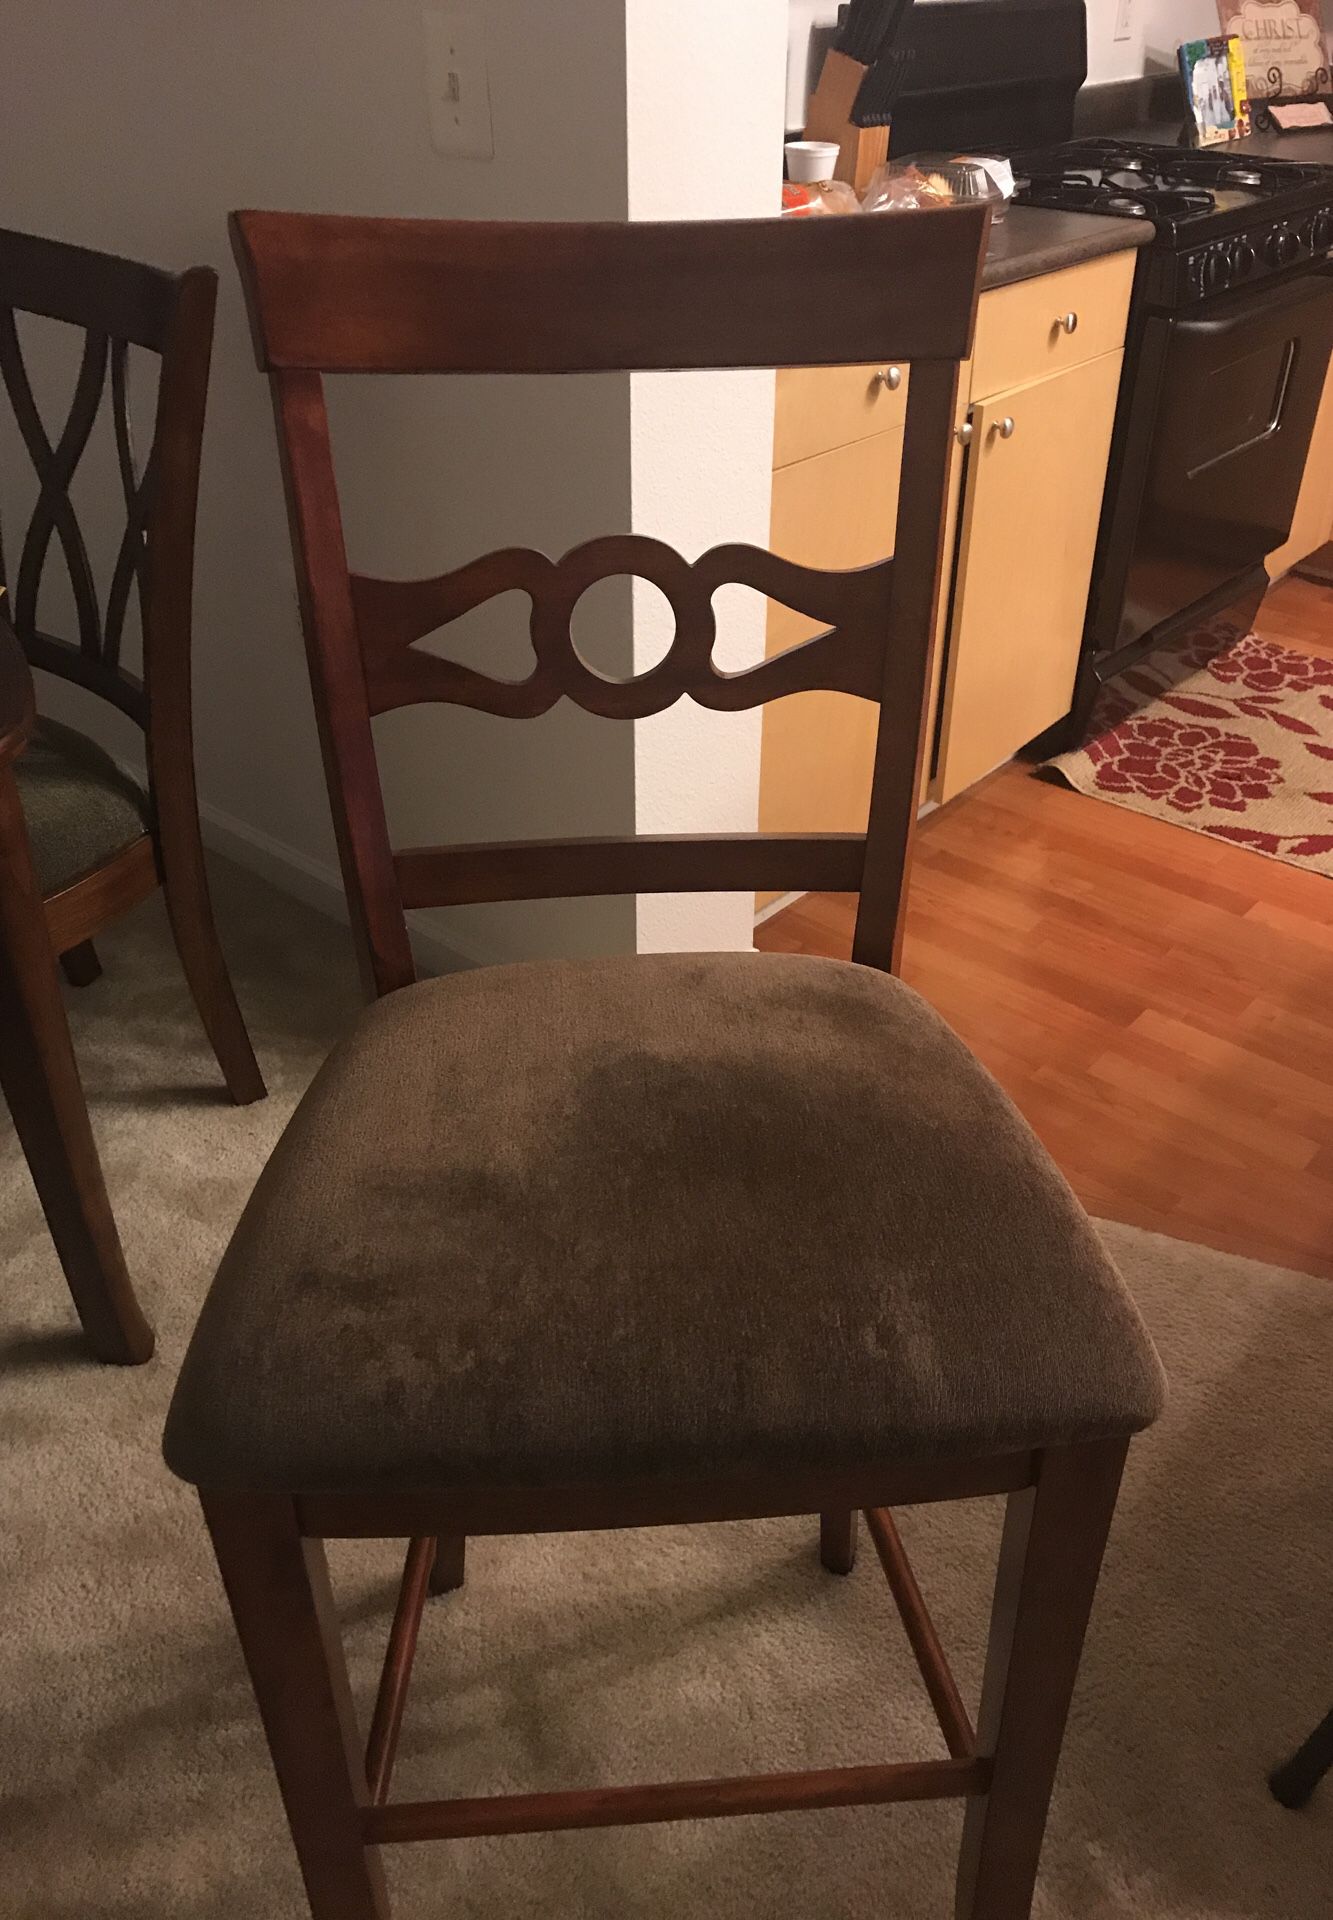 2 bar stools for $60